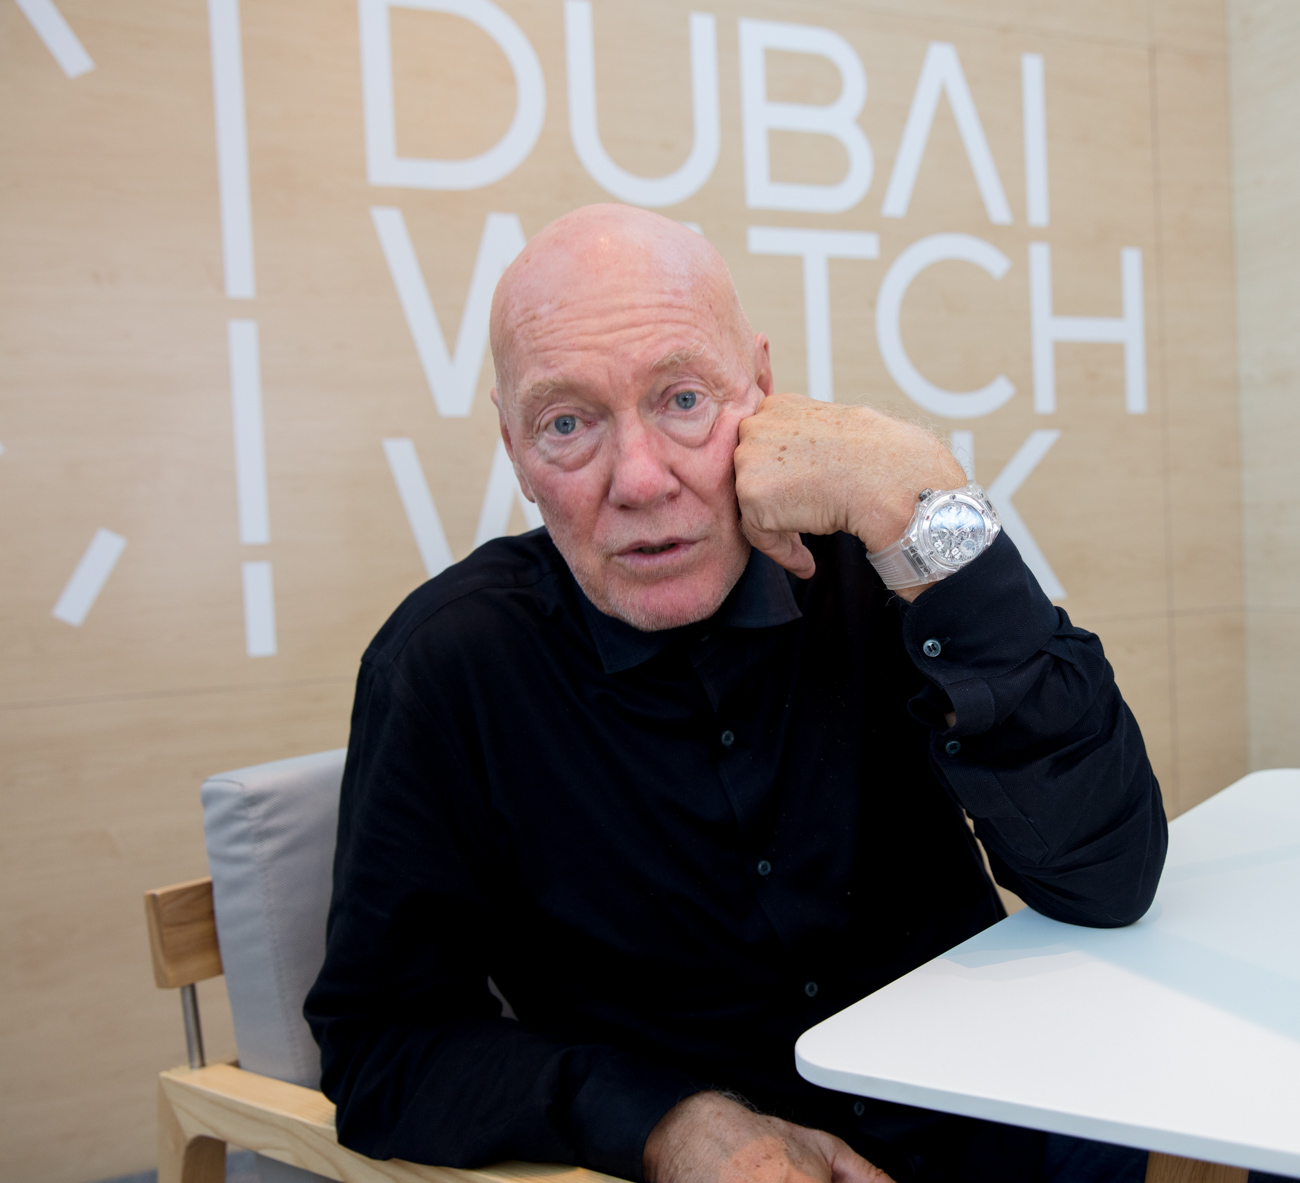 Jean-Claude Biver Awarded the GPHG Special Jury Prize - PMT The Hour Glass  Thailand